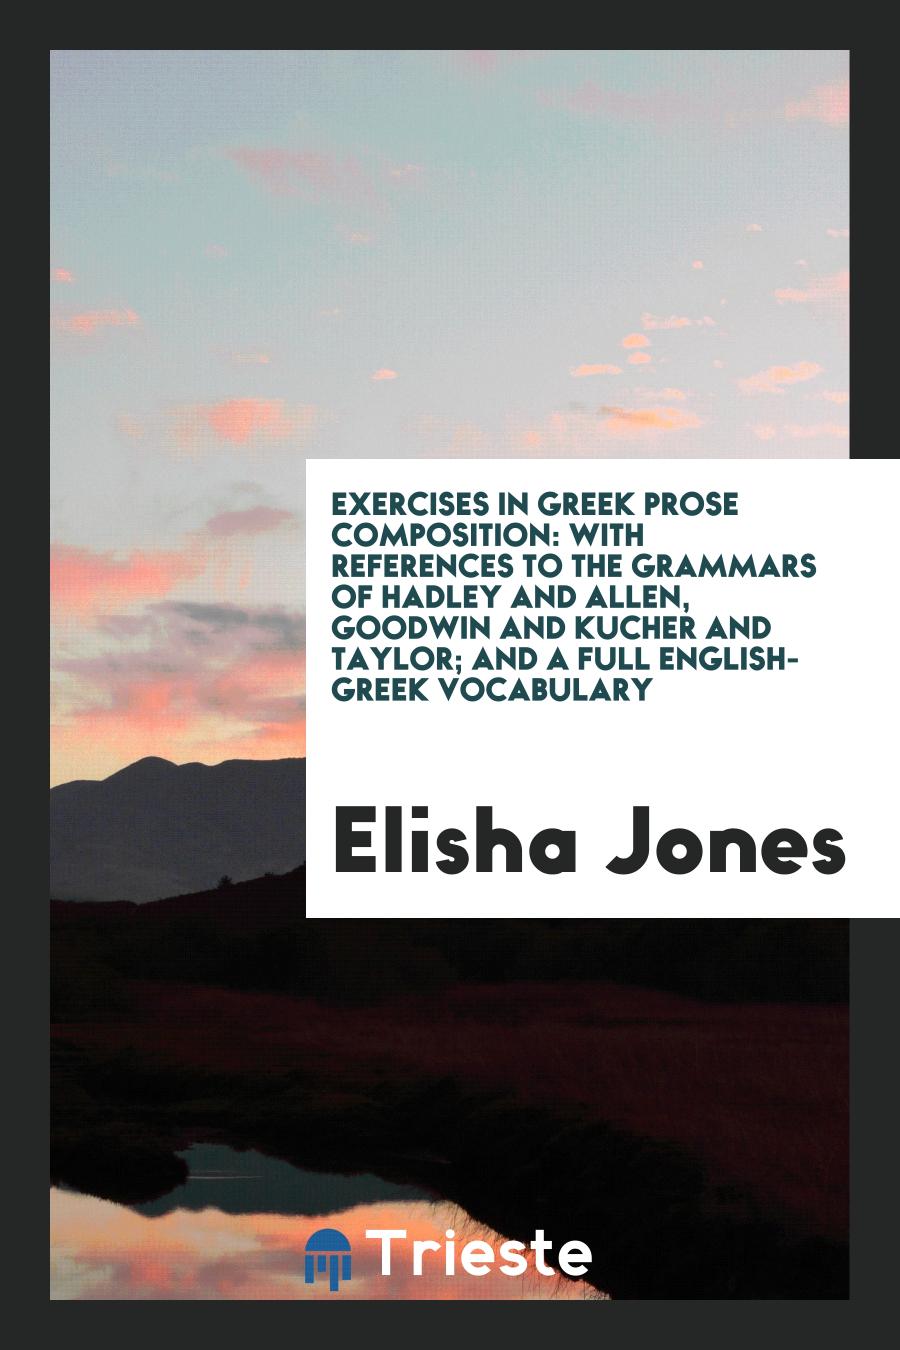 Exercises in Greek Prose Composition: With References to the Grammars of Hadley and Allen, Goodwin and Kucher and Taylor; And a Full English-Greek Vocabulary